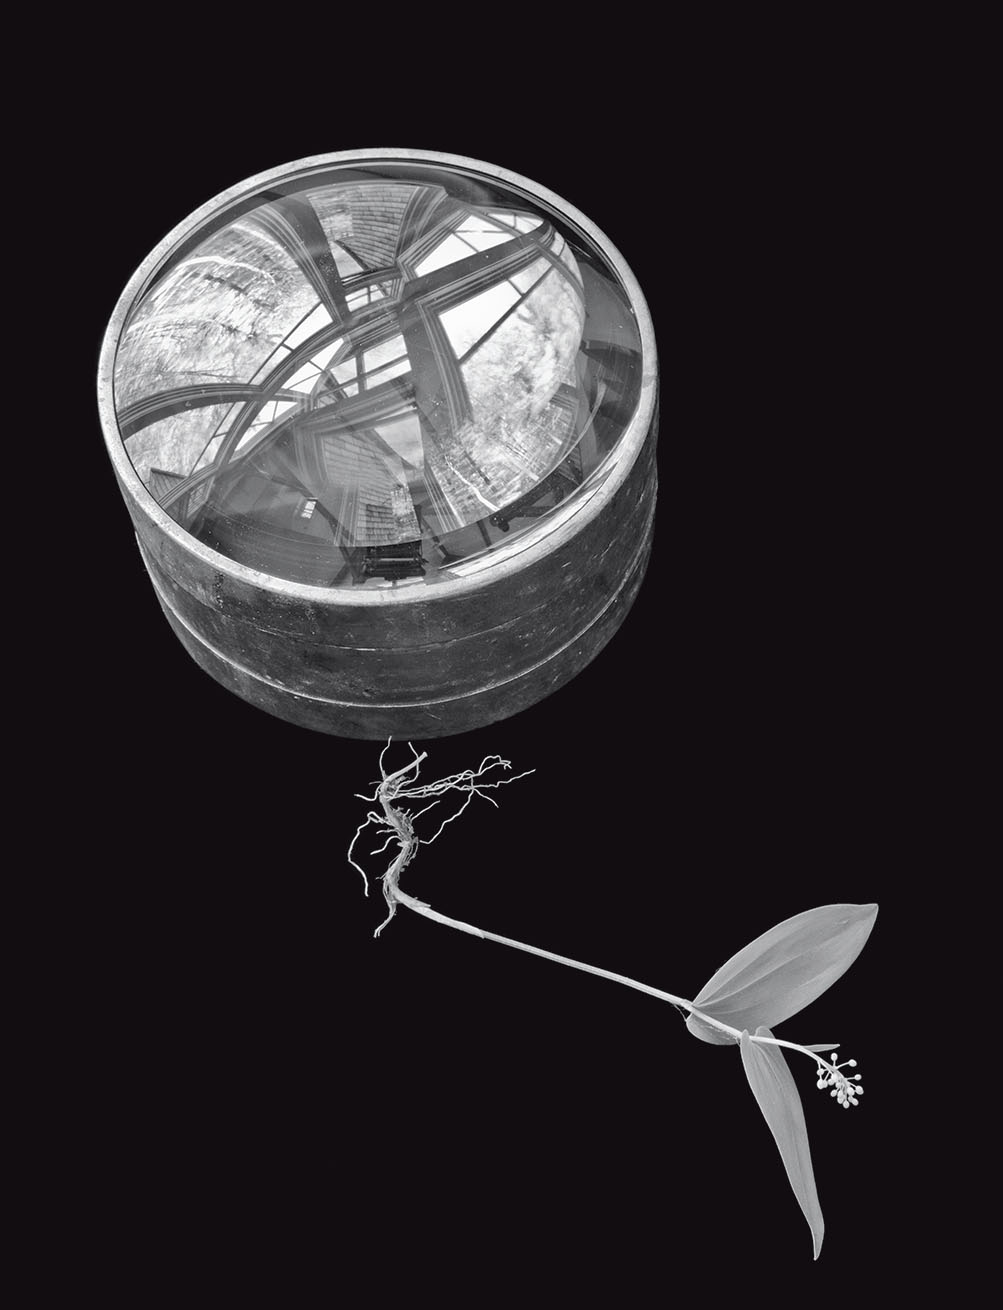 Specimens by Olivia Hood Parker ’63,  featuring a circular metallic container with a glass lid that reflects the room its in, and a plant with its roots still attached, on a black backdrop